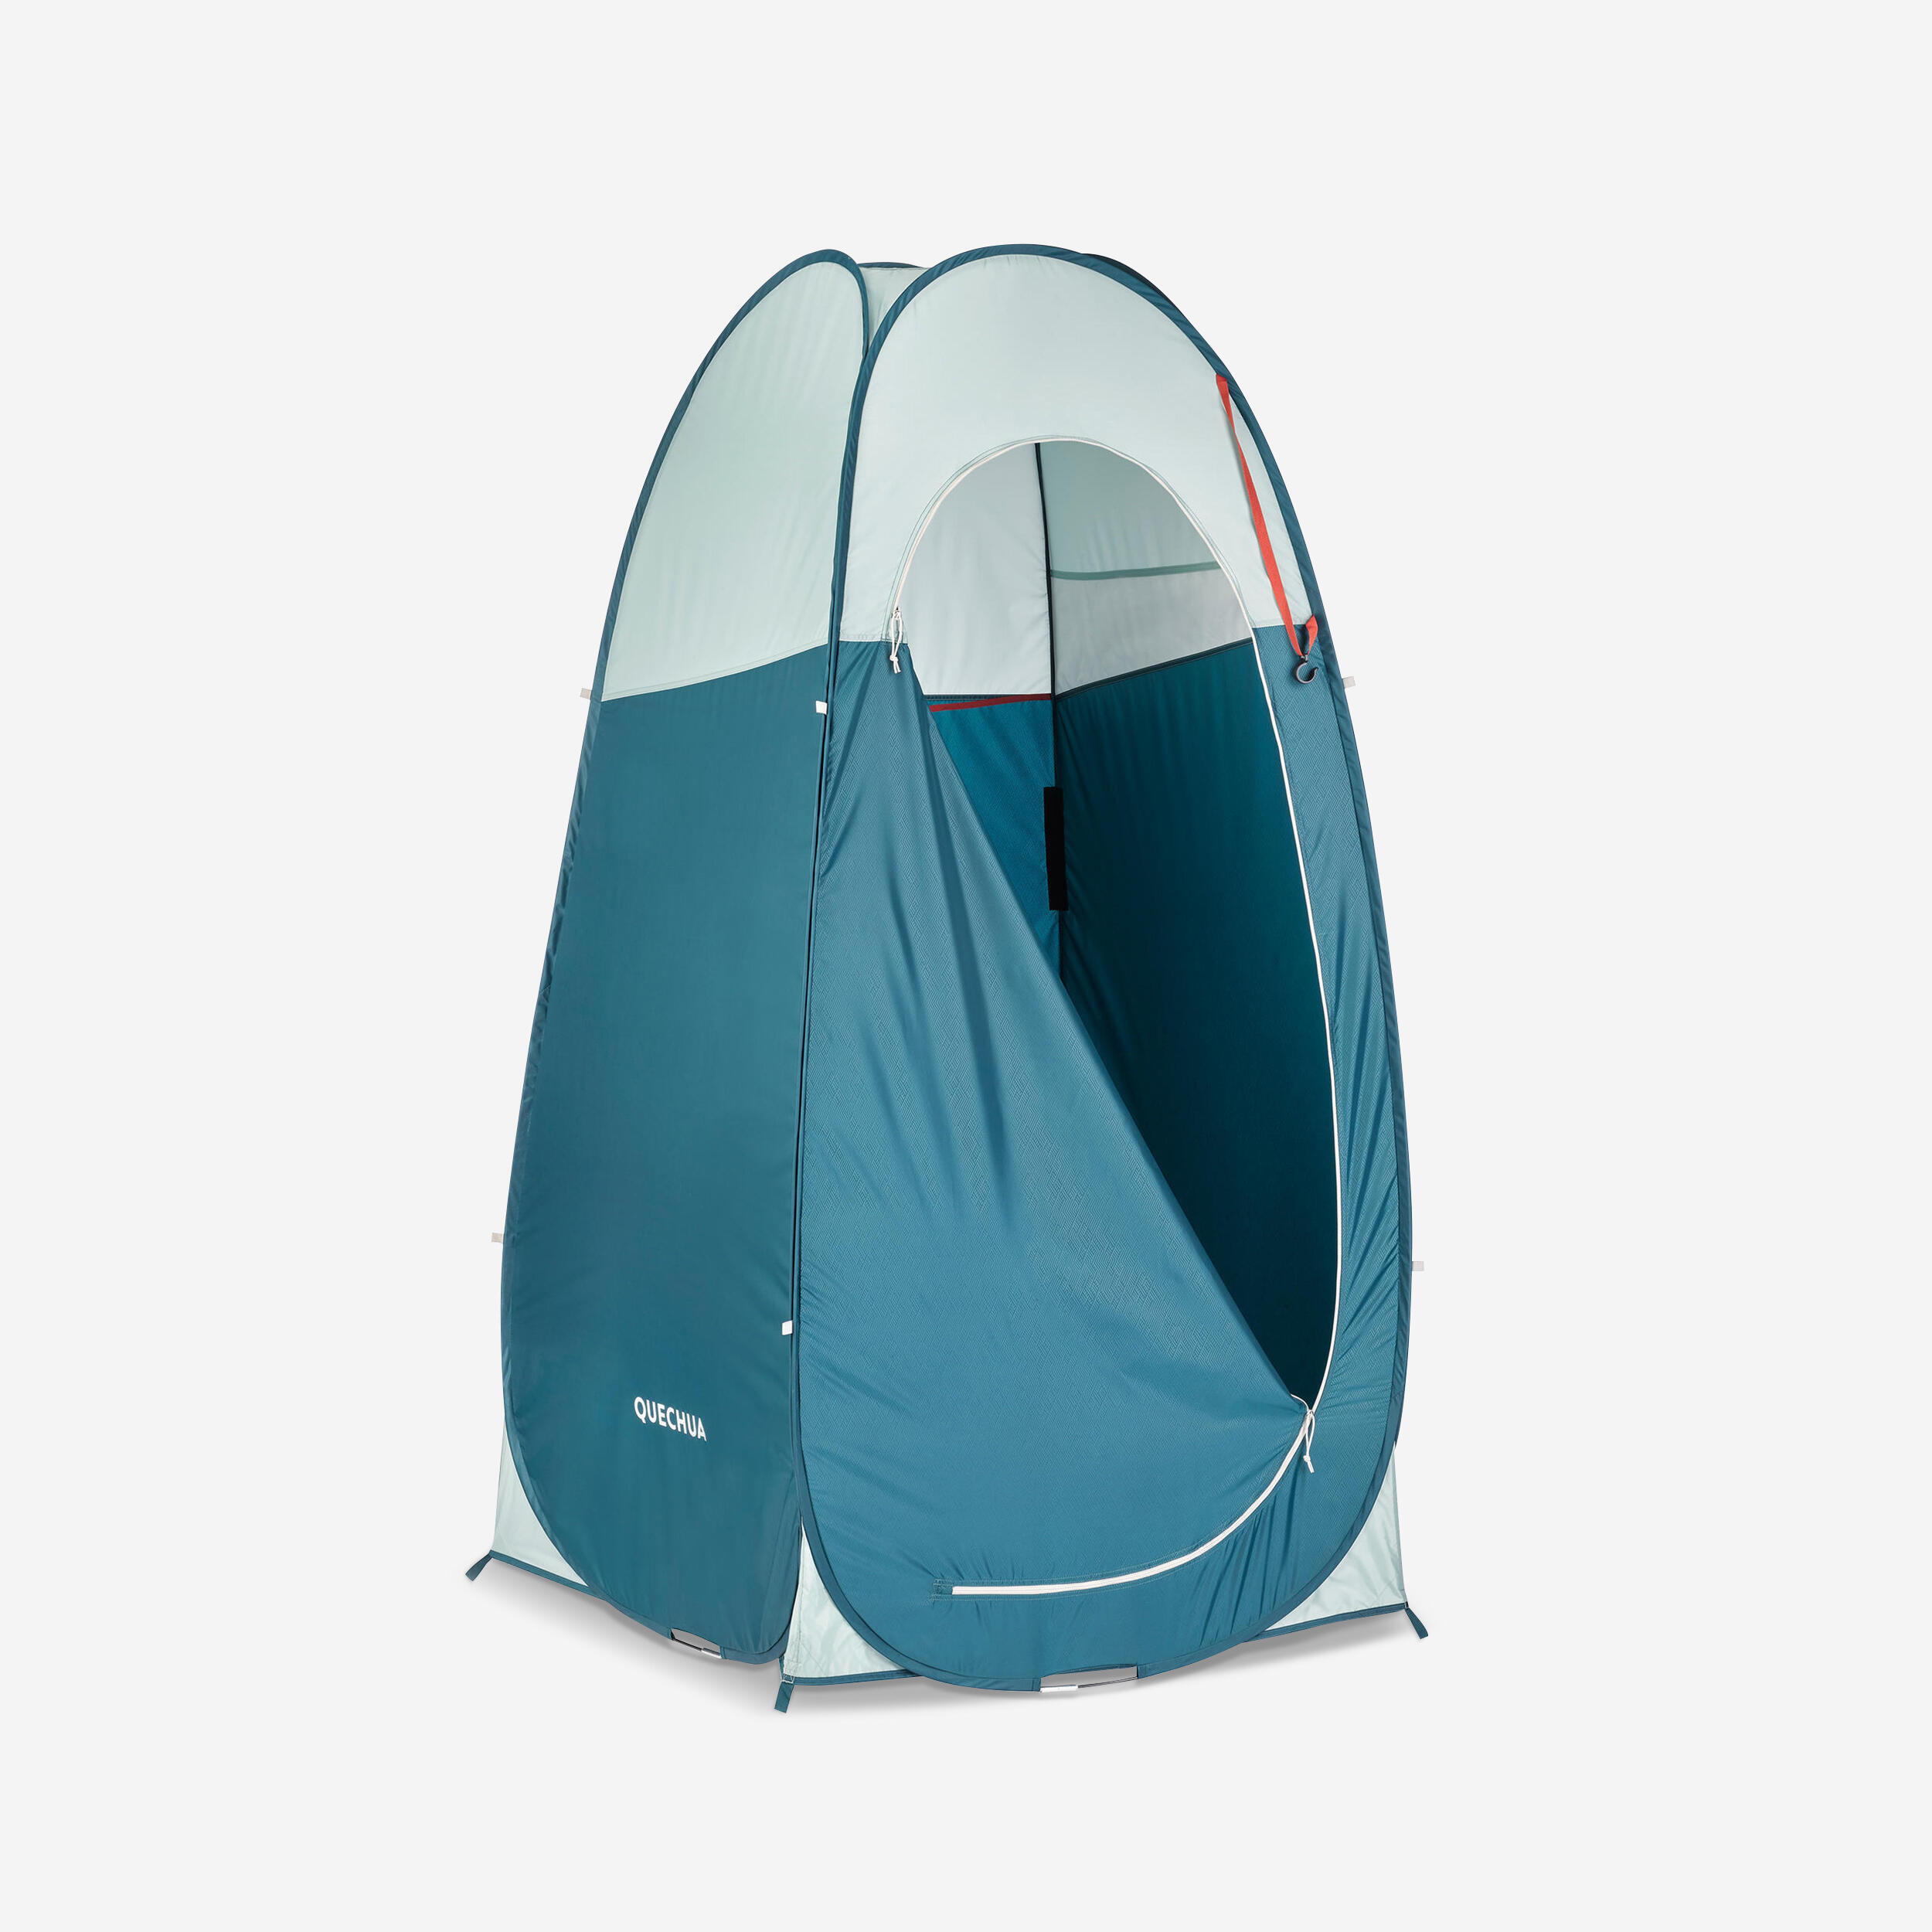 QUECHUA CAMPING SHOWER CUBICLE - 2SECONDS